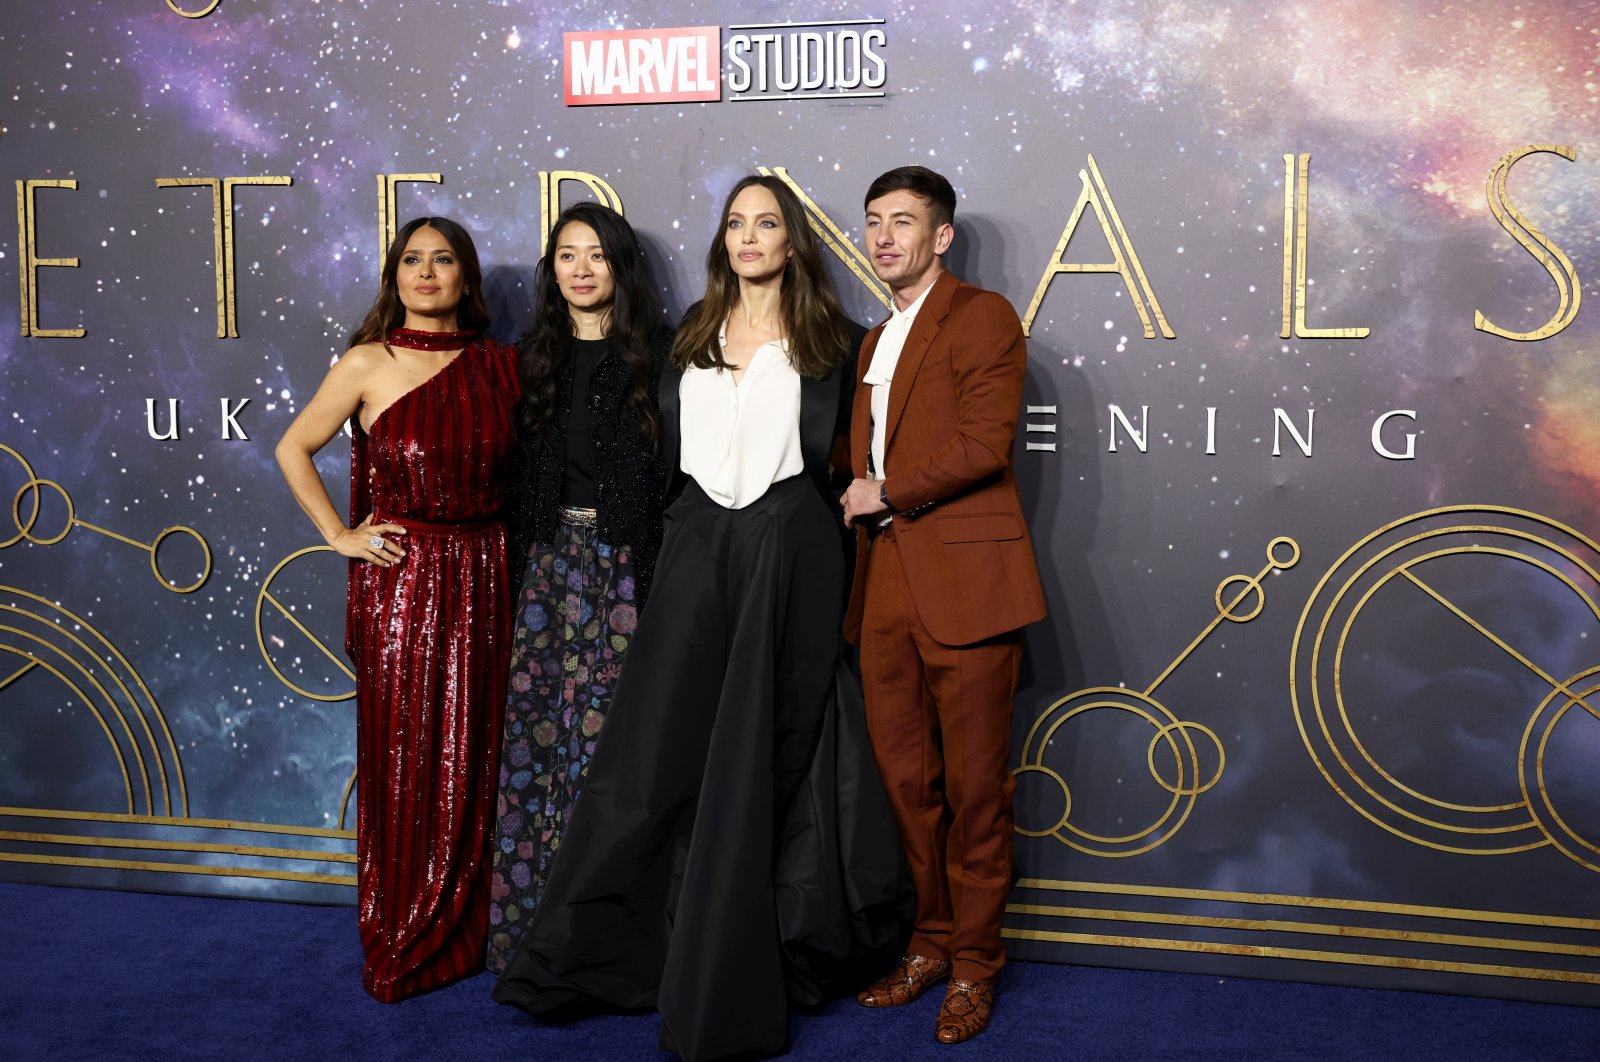 Director Chloe Zhao (C-L) poses with cast members Salma Hayek (L), Angelina Jolie (C-R) and Barry Keoghan as they arrive for a screening of the film "Eternals" in London, U.K., Oct. 27, 2021. (Reuters Photo)